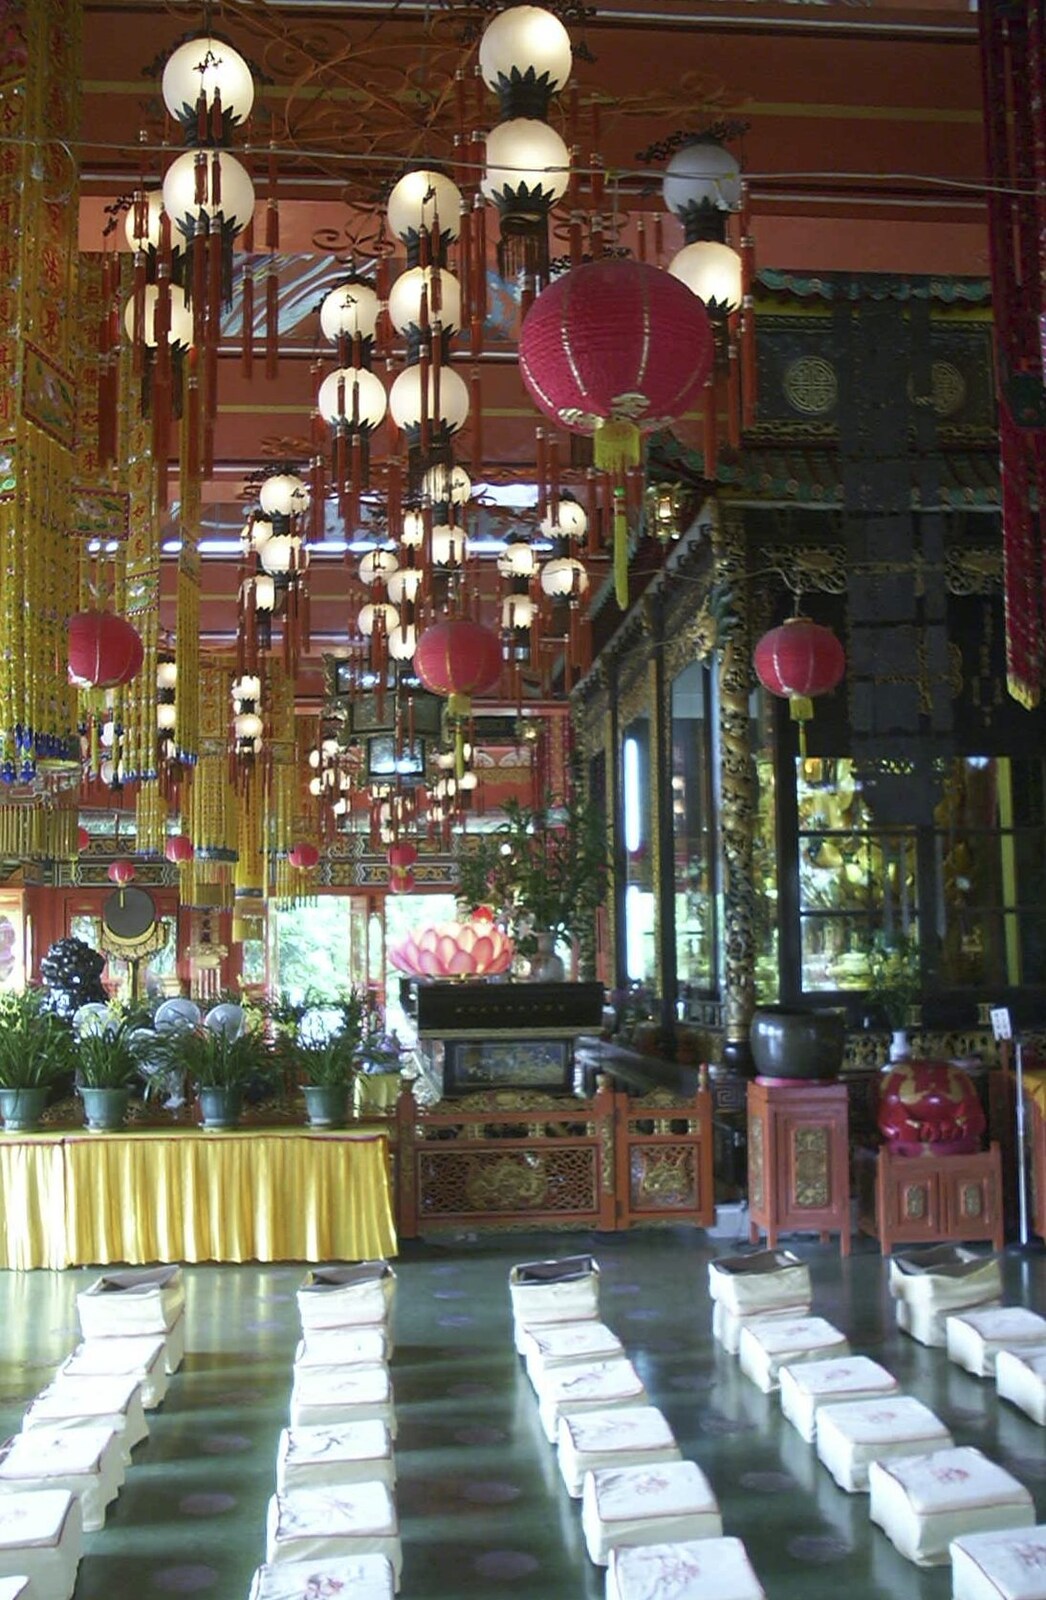 Lantau Island and the Po Lin Monastery, Hong Kong, China - 14th August 2001: A view inside one of the working temples